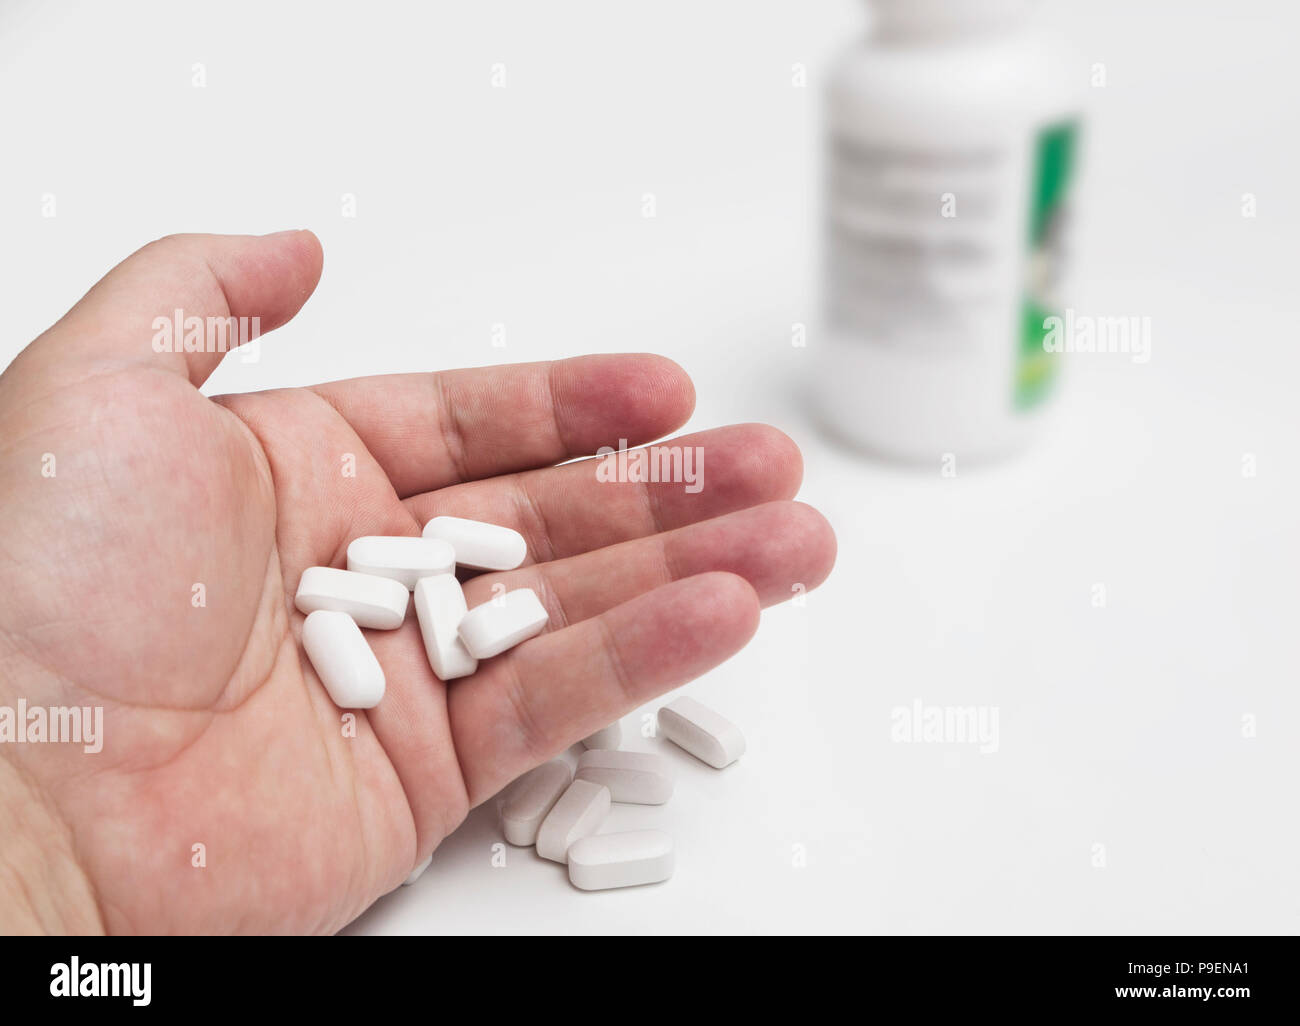 White pills and medicines in the hand Stock Photo